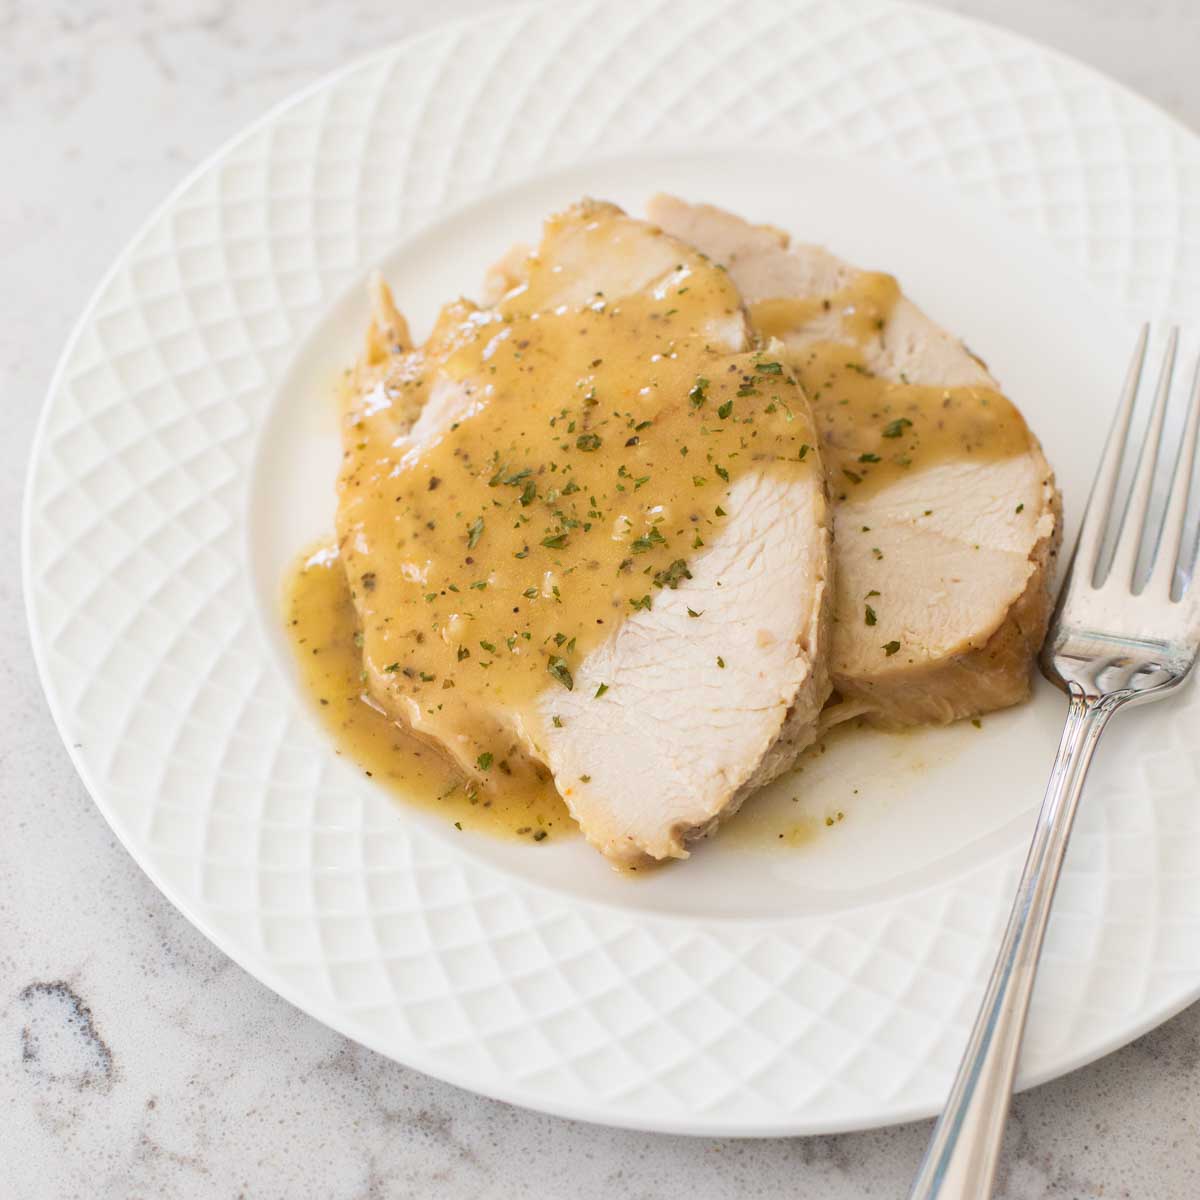 Two slices of slow cooked turkey breast are on a plate drizzled with gravy.